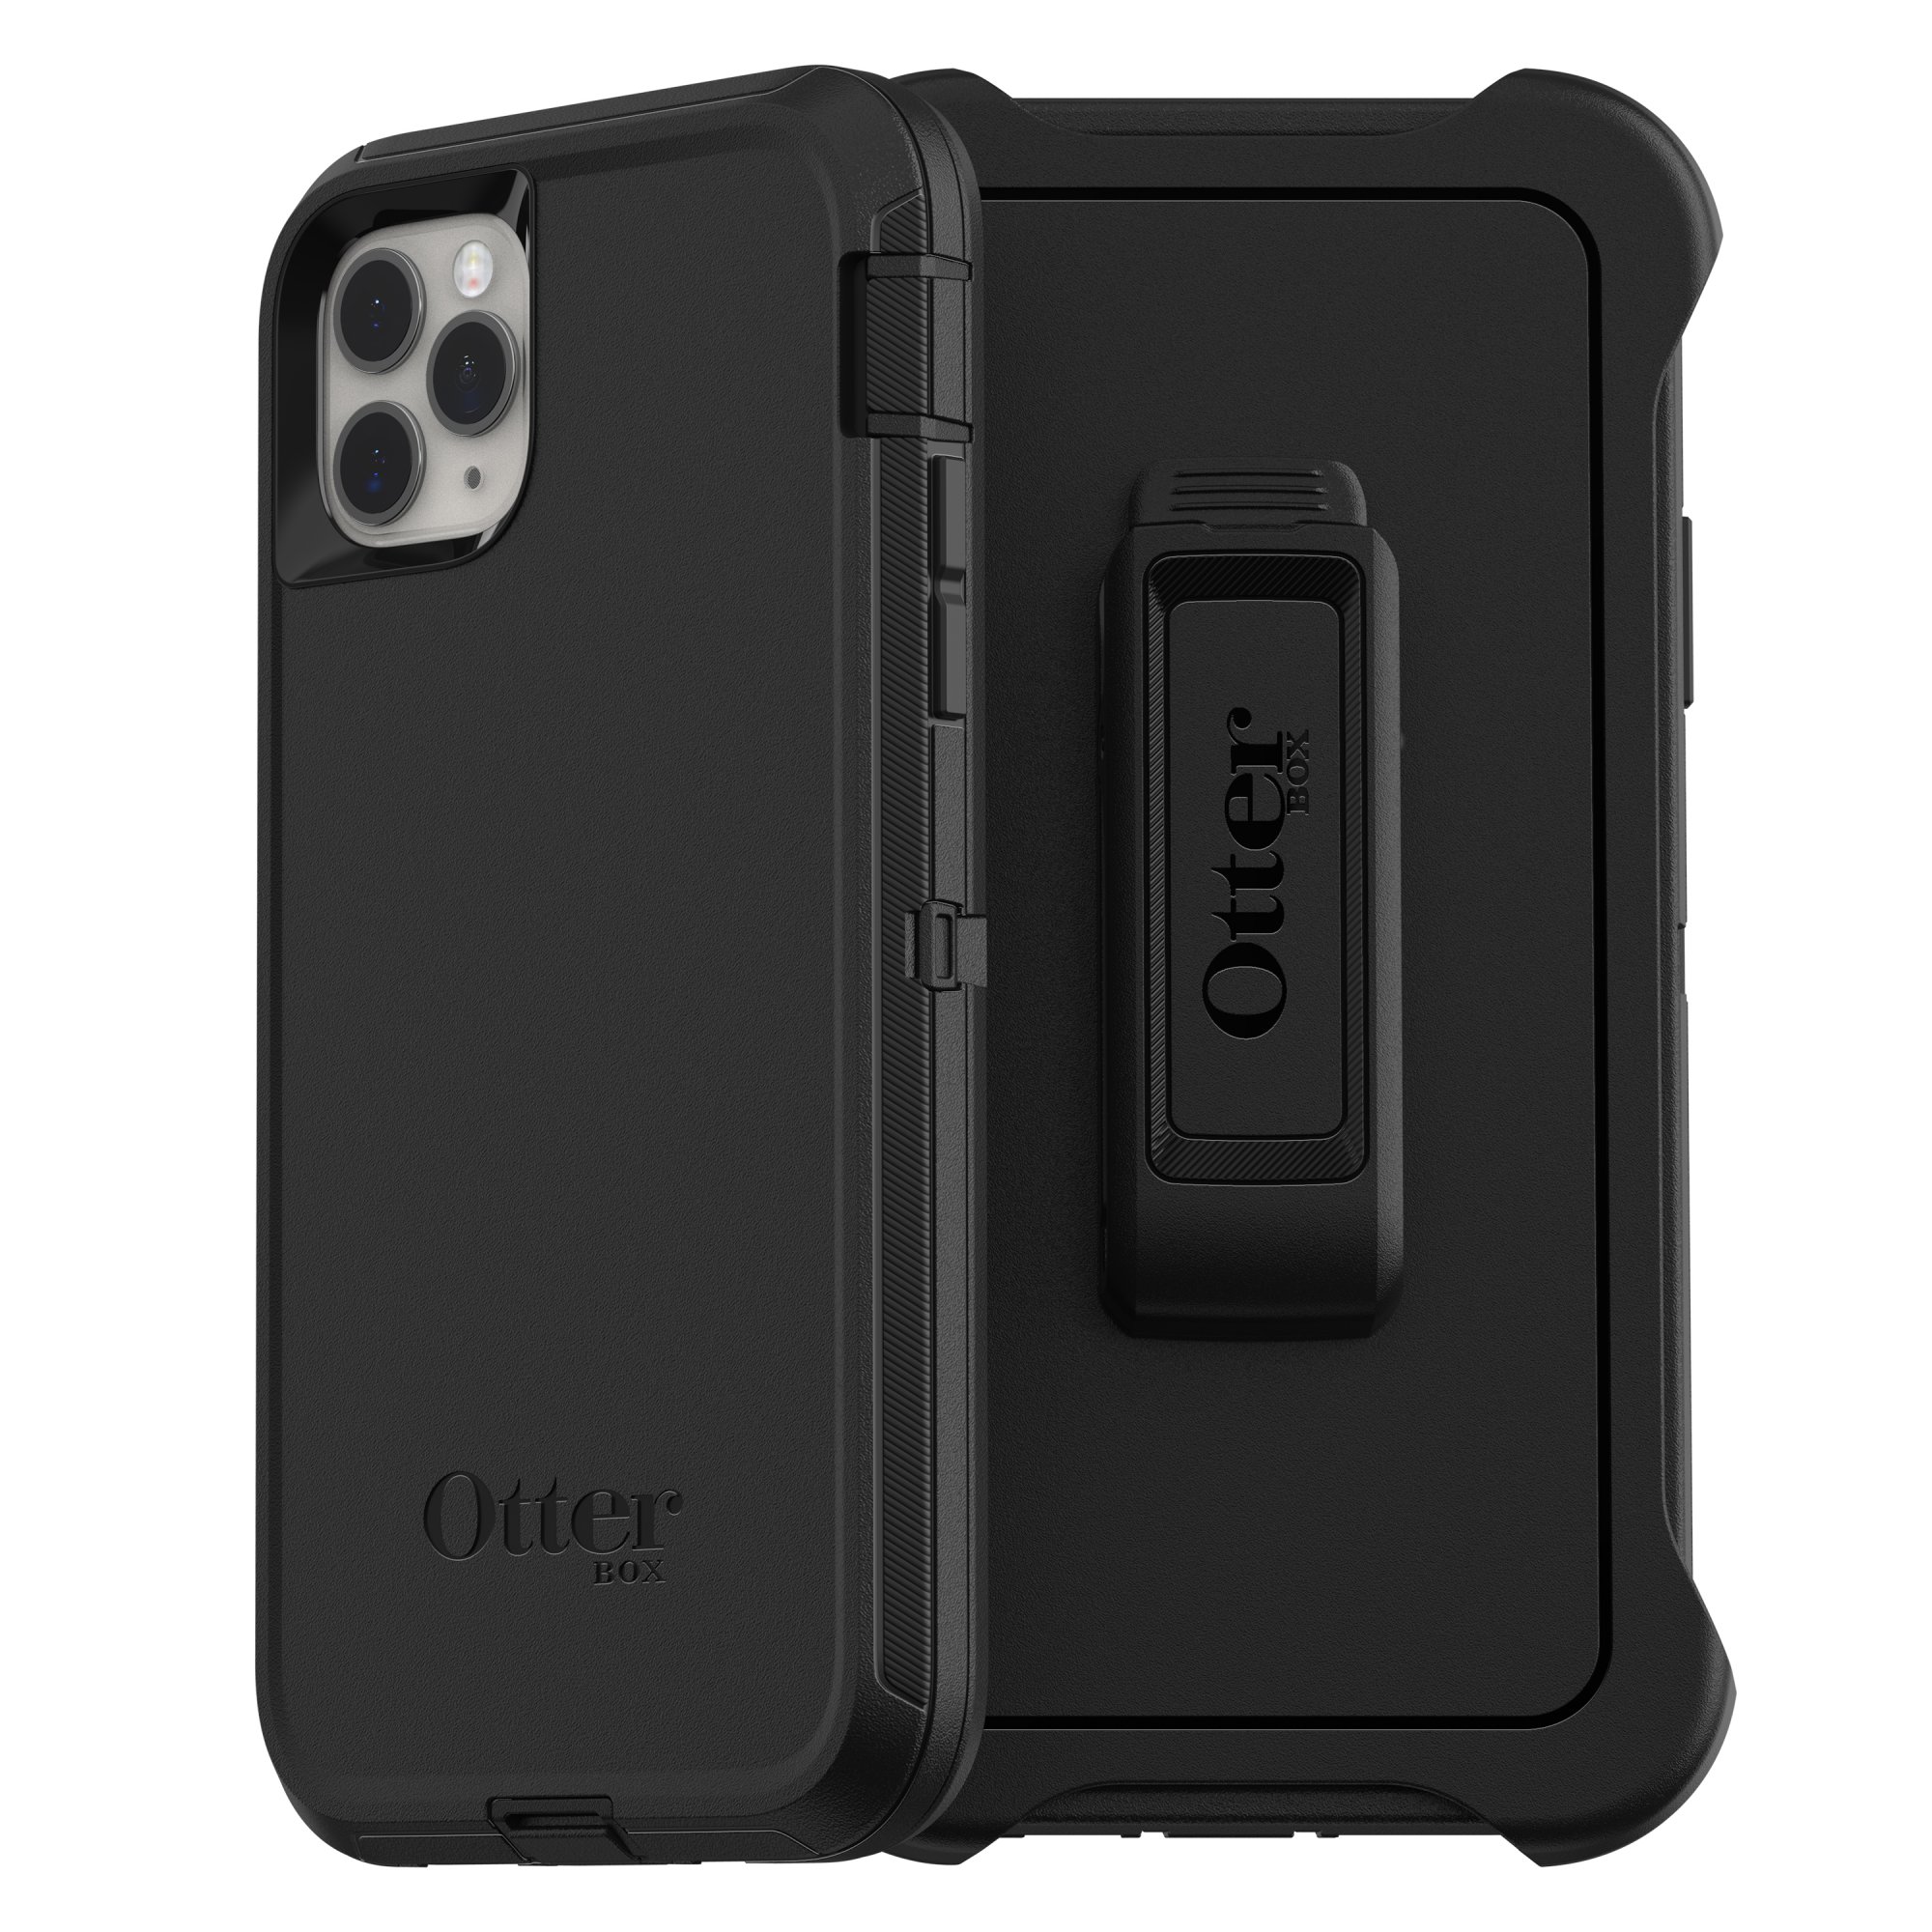 Otterbox OtterBox Defender Series for Apple iPhone 11 Pro Max, black